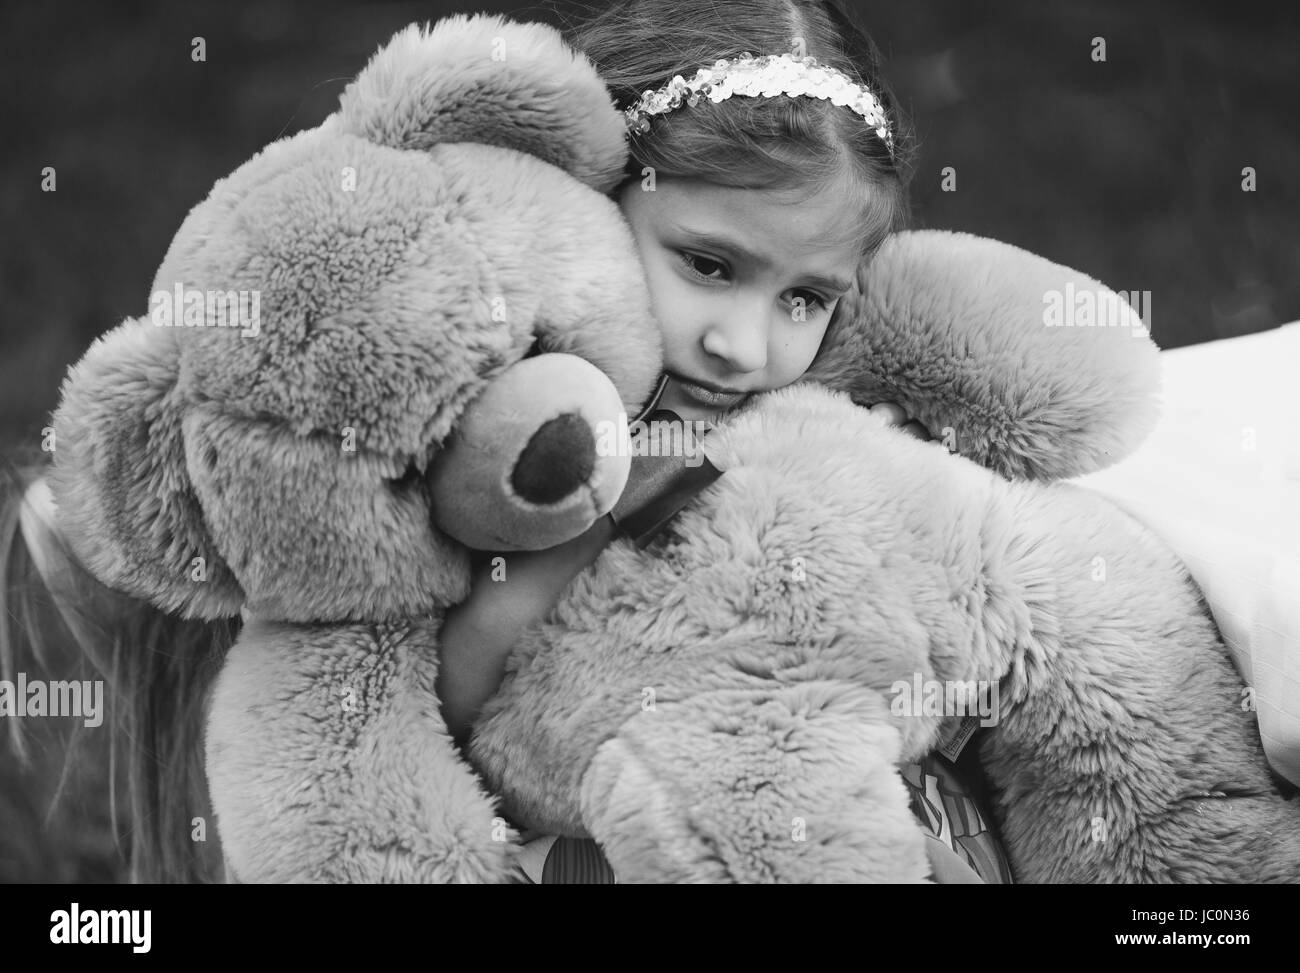 Black and white portrait of small crying girl hugging teddy bear Stock Photo